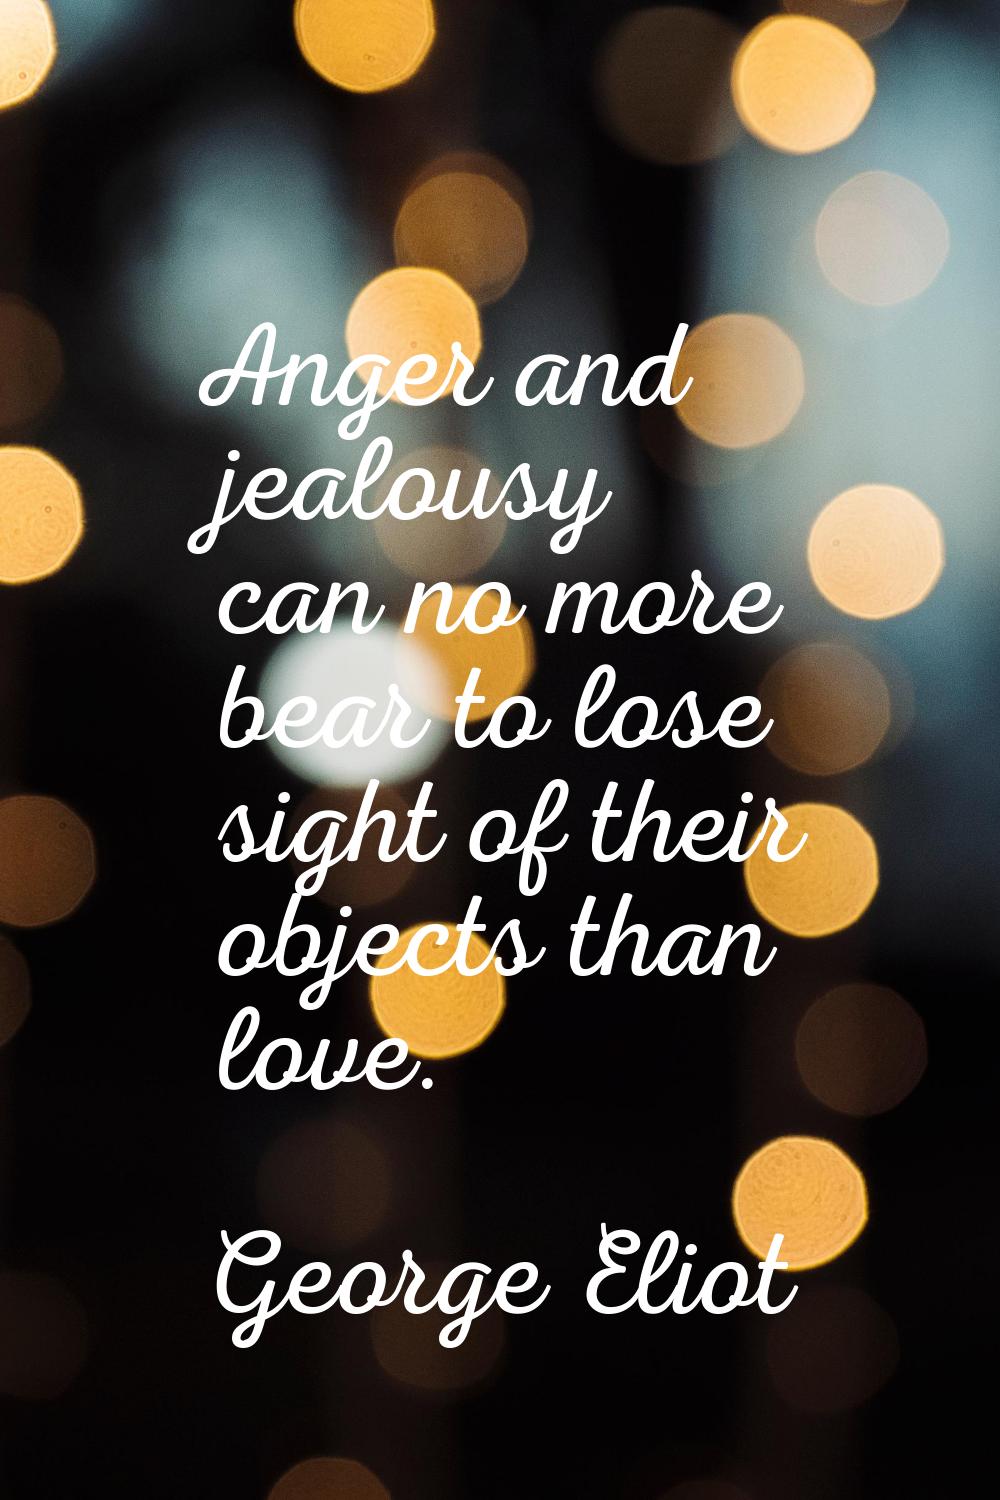 Anger and jealousy can no more bear to lose sight of their objects than love.